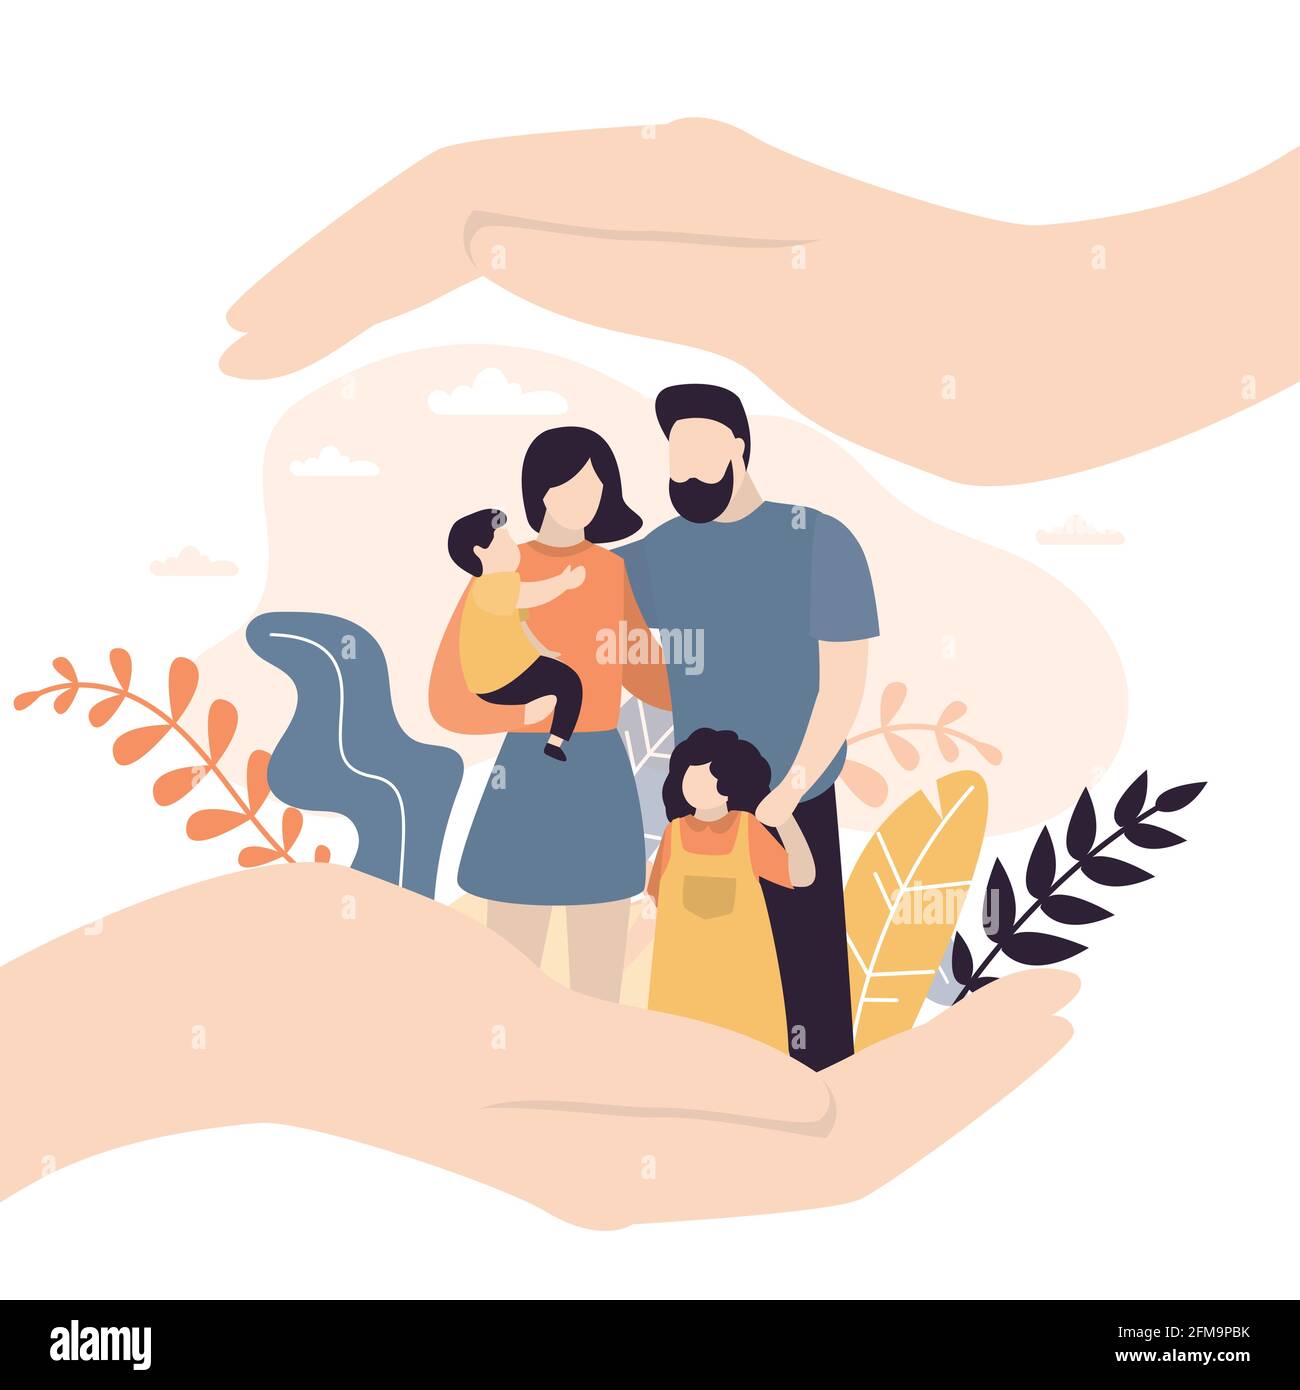 Insurance and healthcare concept background. Big hands holding and covering tiny young love couple with children. Medical or financial assurance,famil Stock Vector